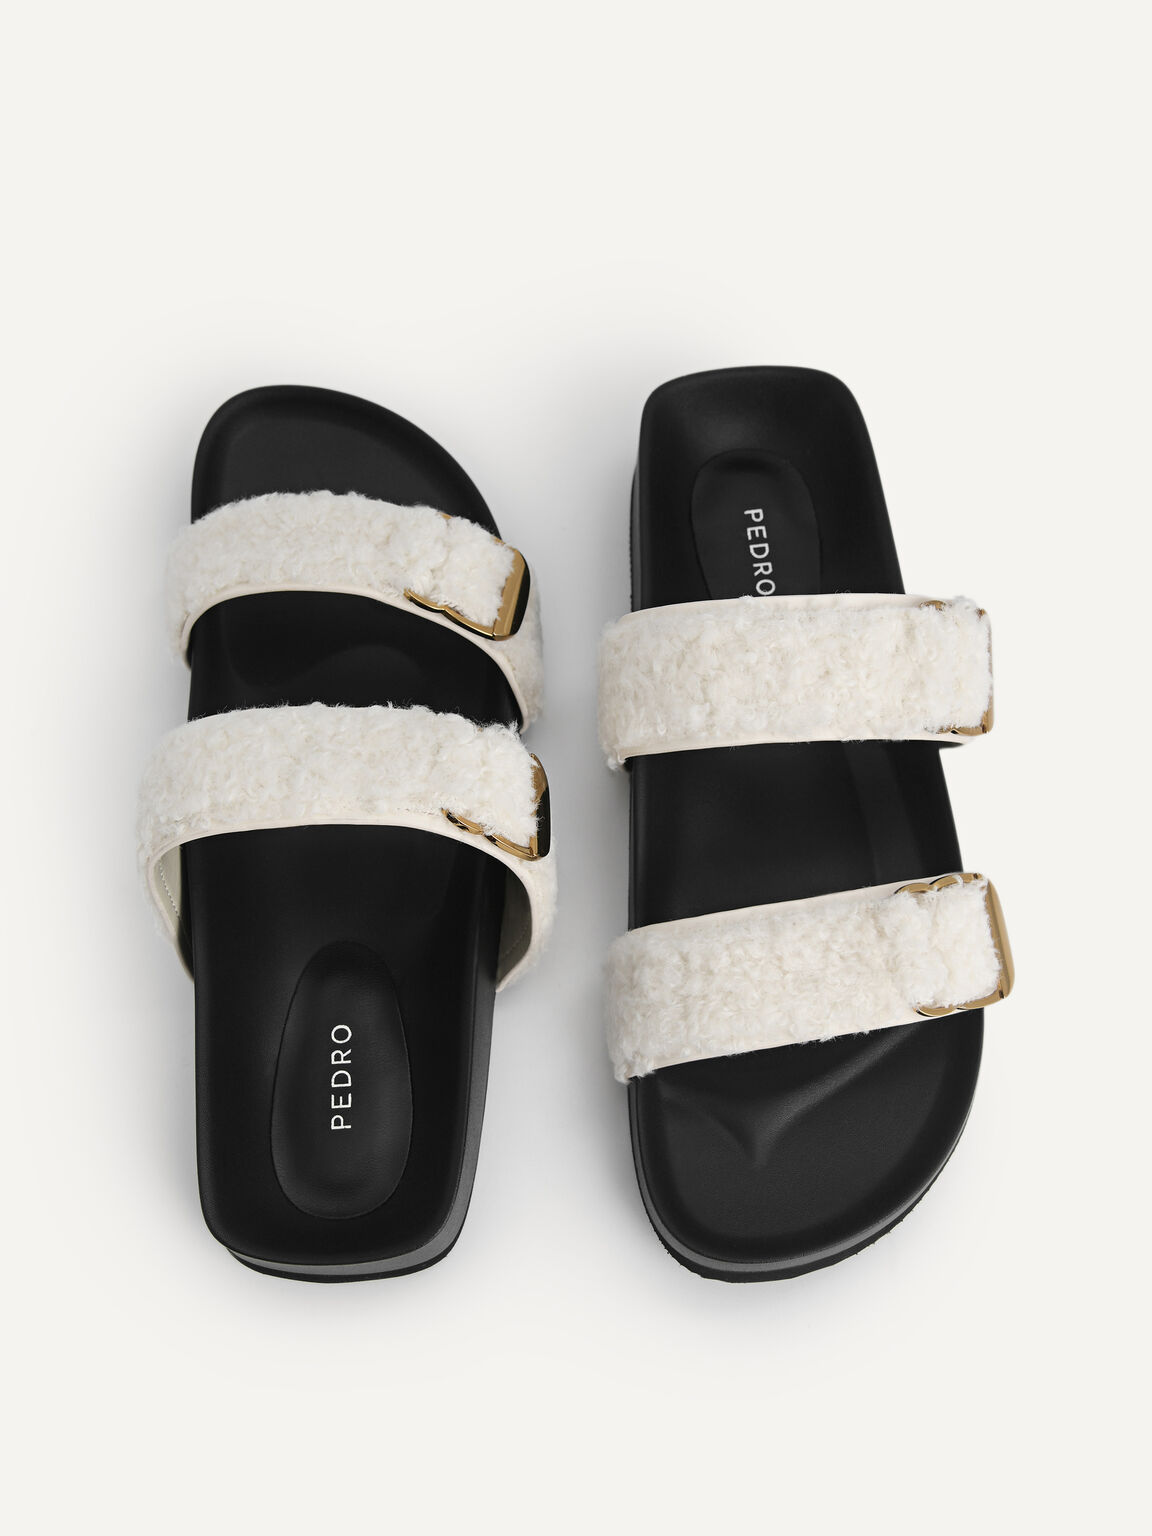 Shearling Double Strap Sandals, Beige